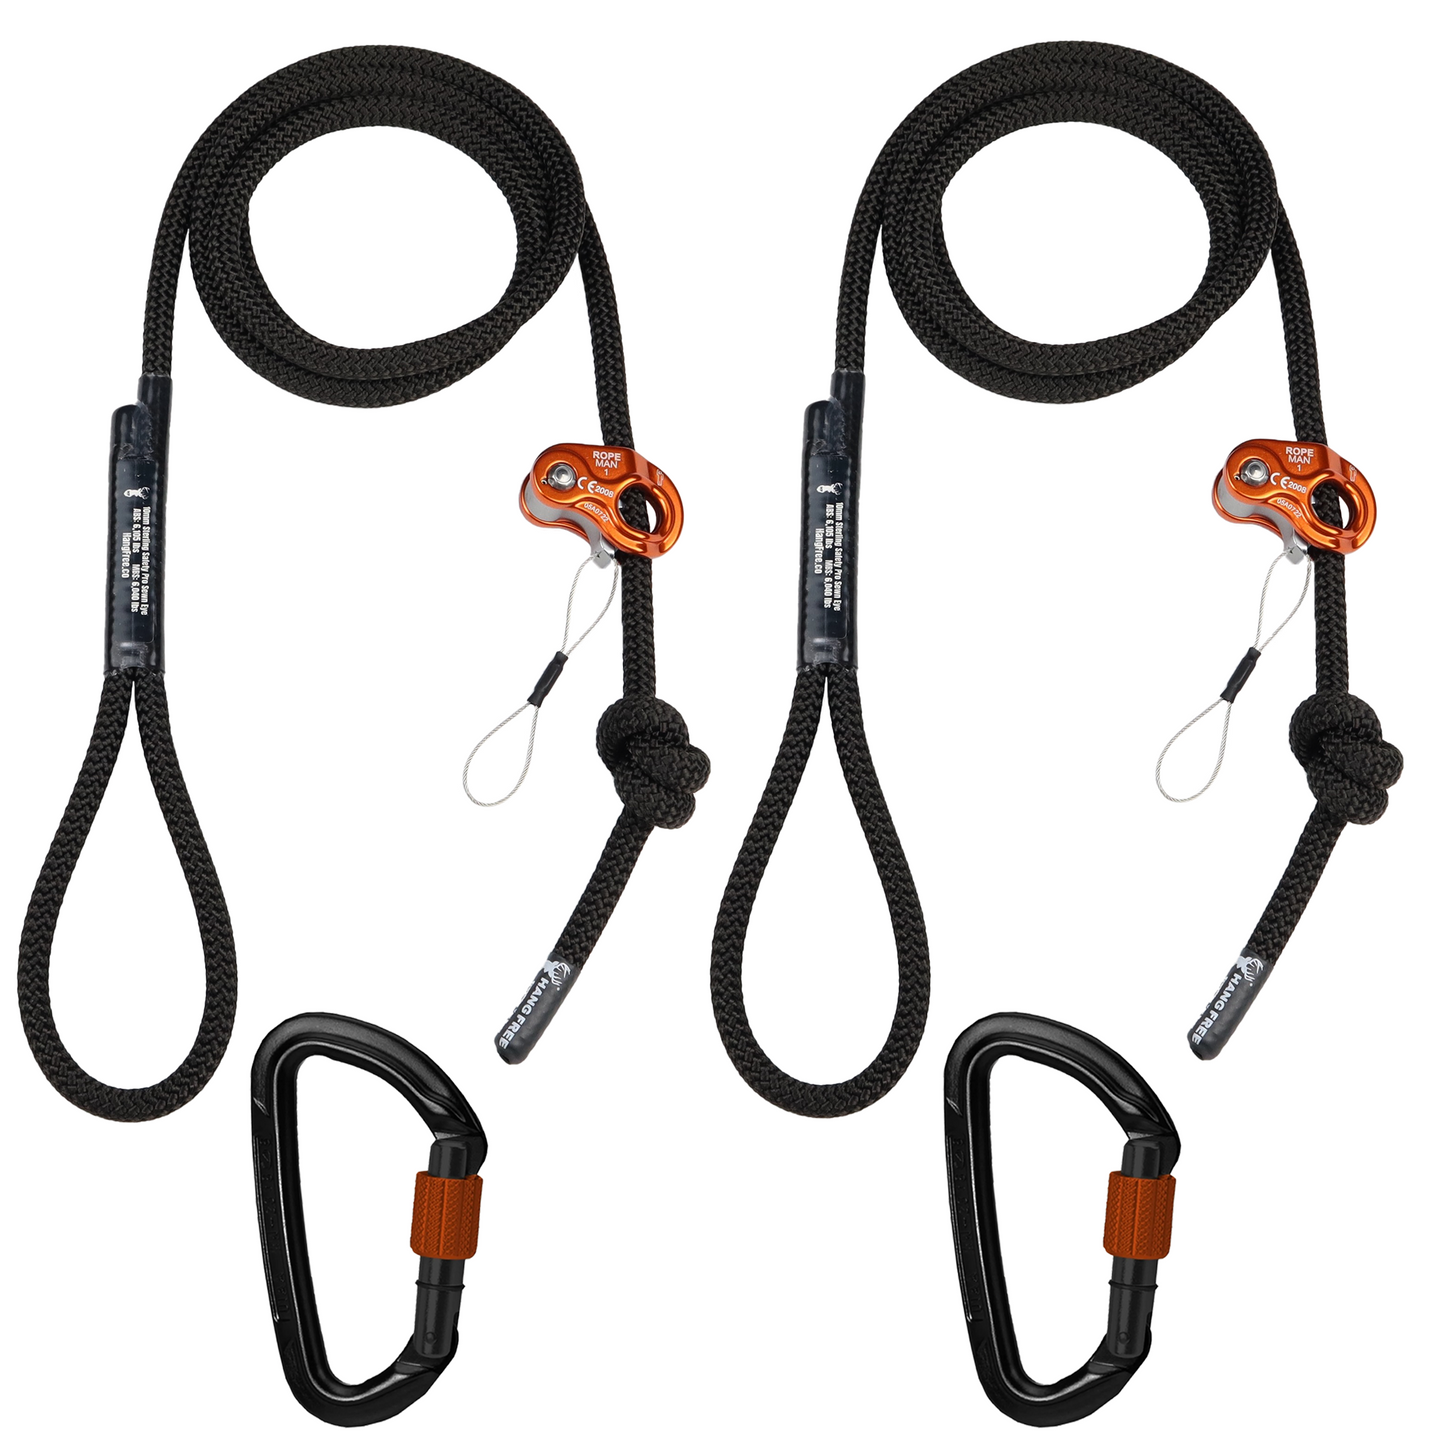 10mm BlackOut Deluxe Tether & Lineman's package with Ropeman 1's & Carabiners